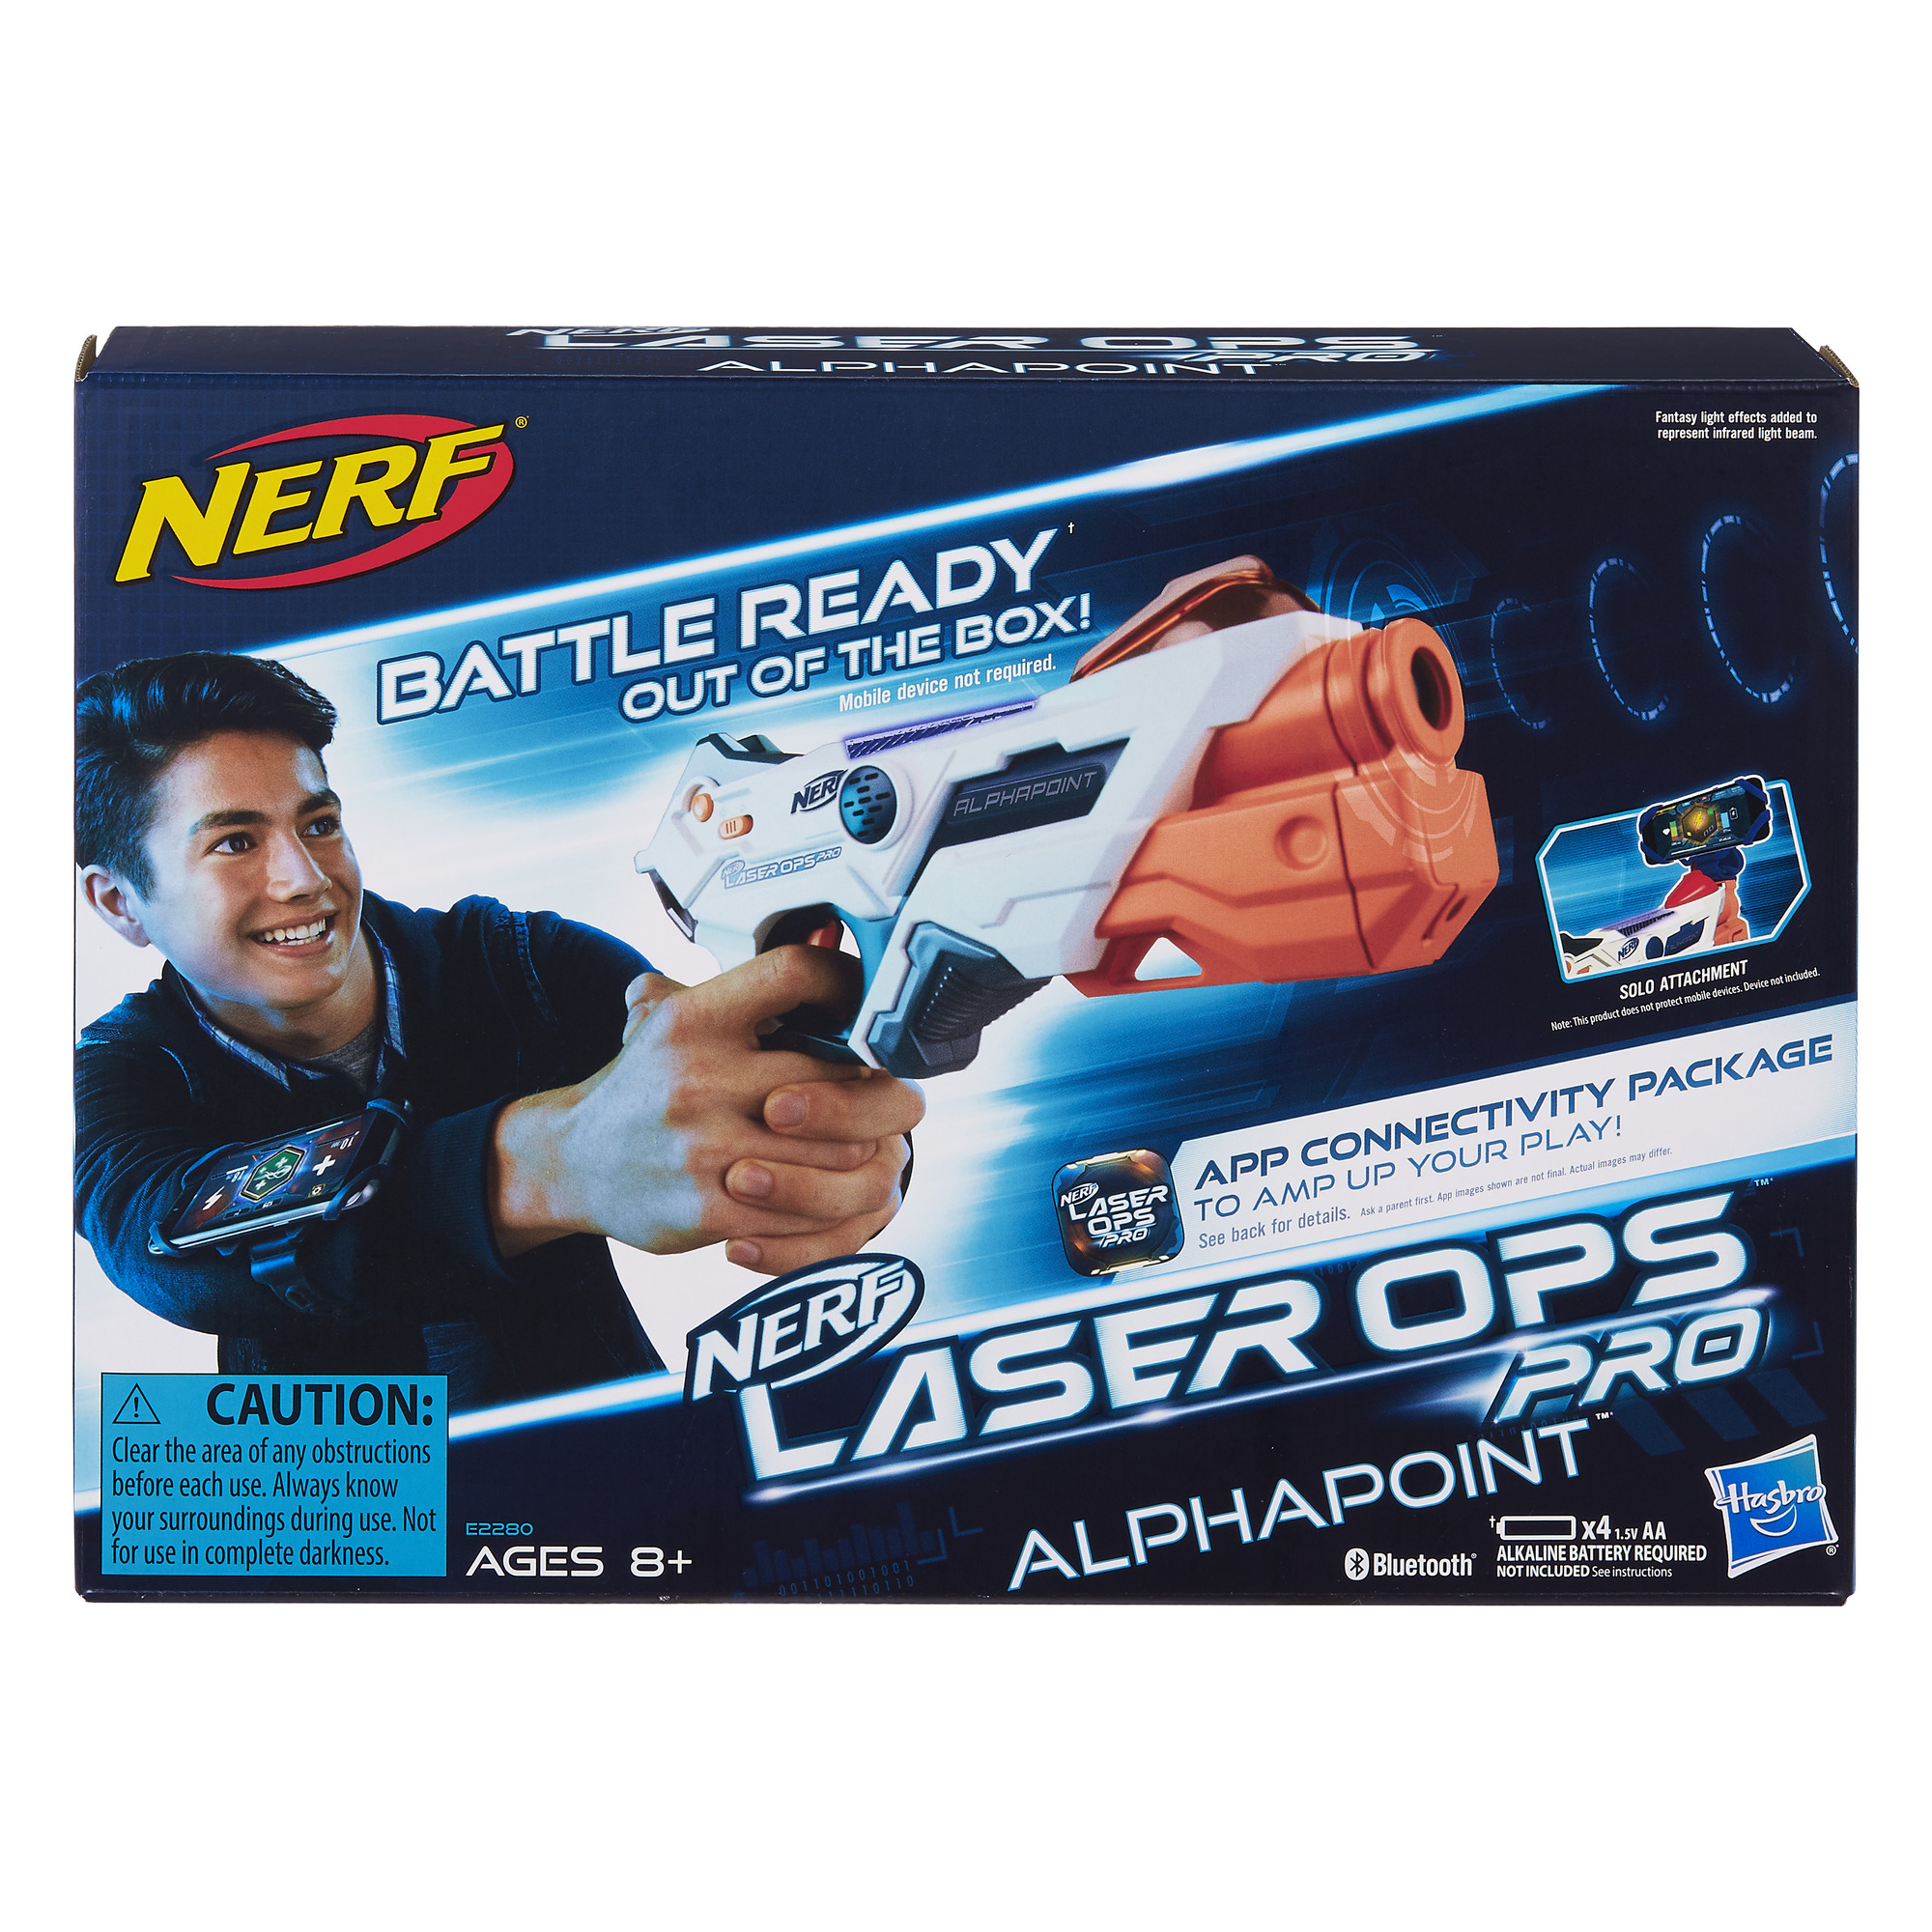 Nerf Laser Ops Pro Alphapoint - image 2 of 14